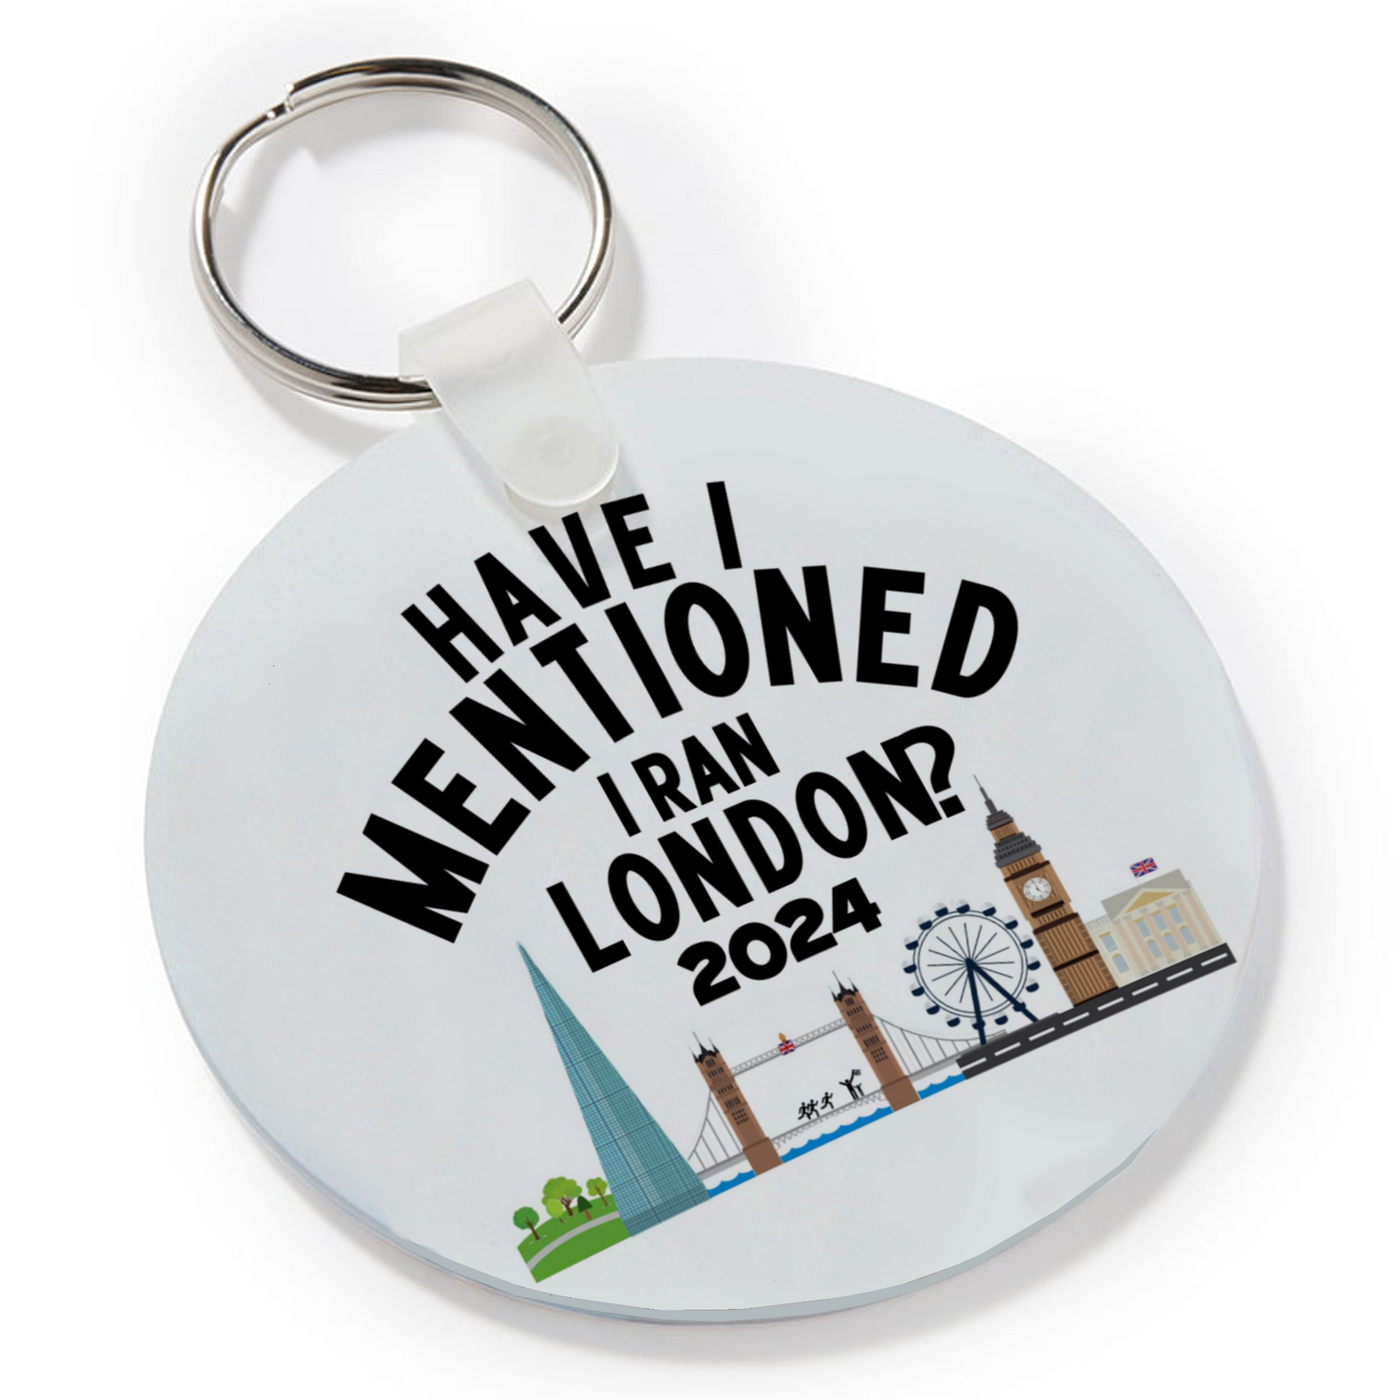 Have I Mentioned I Ran London? Keyring in 2 styles!